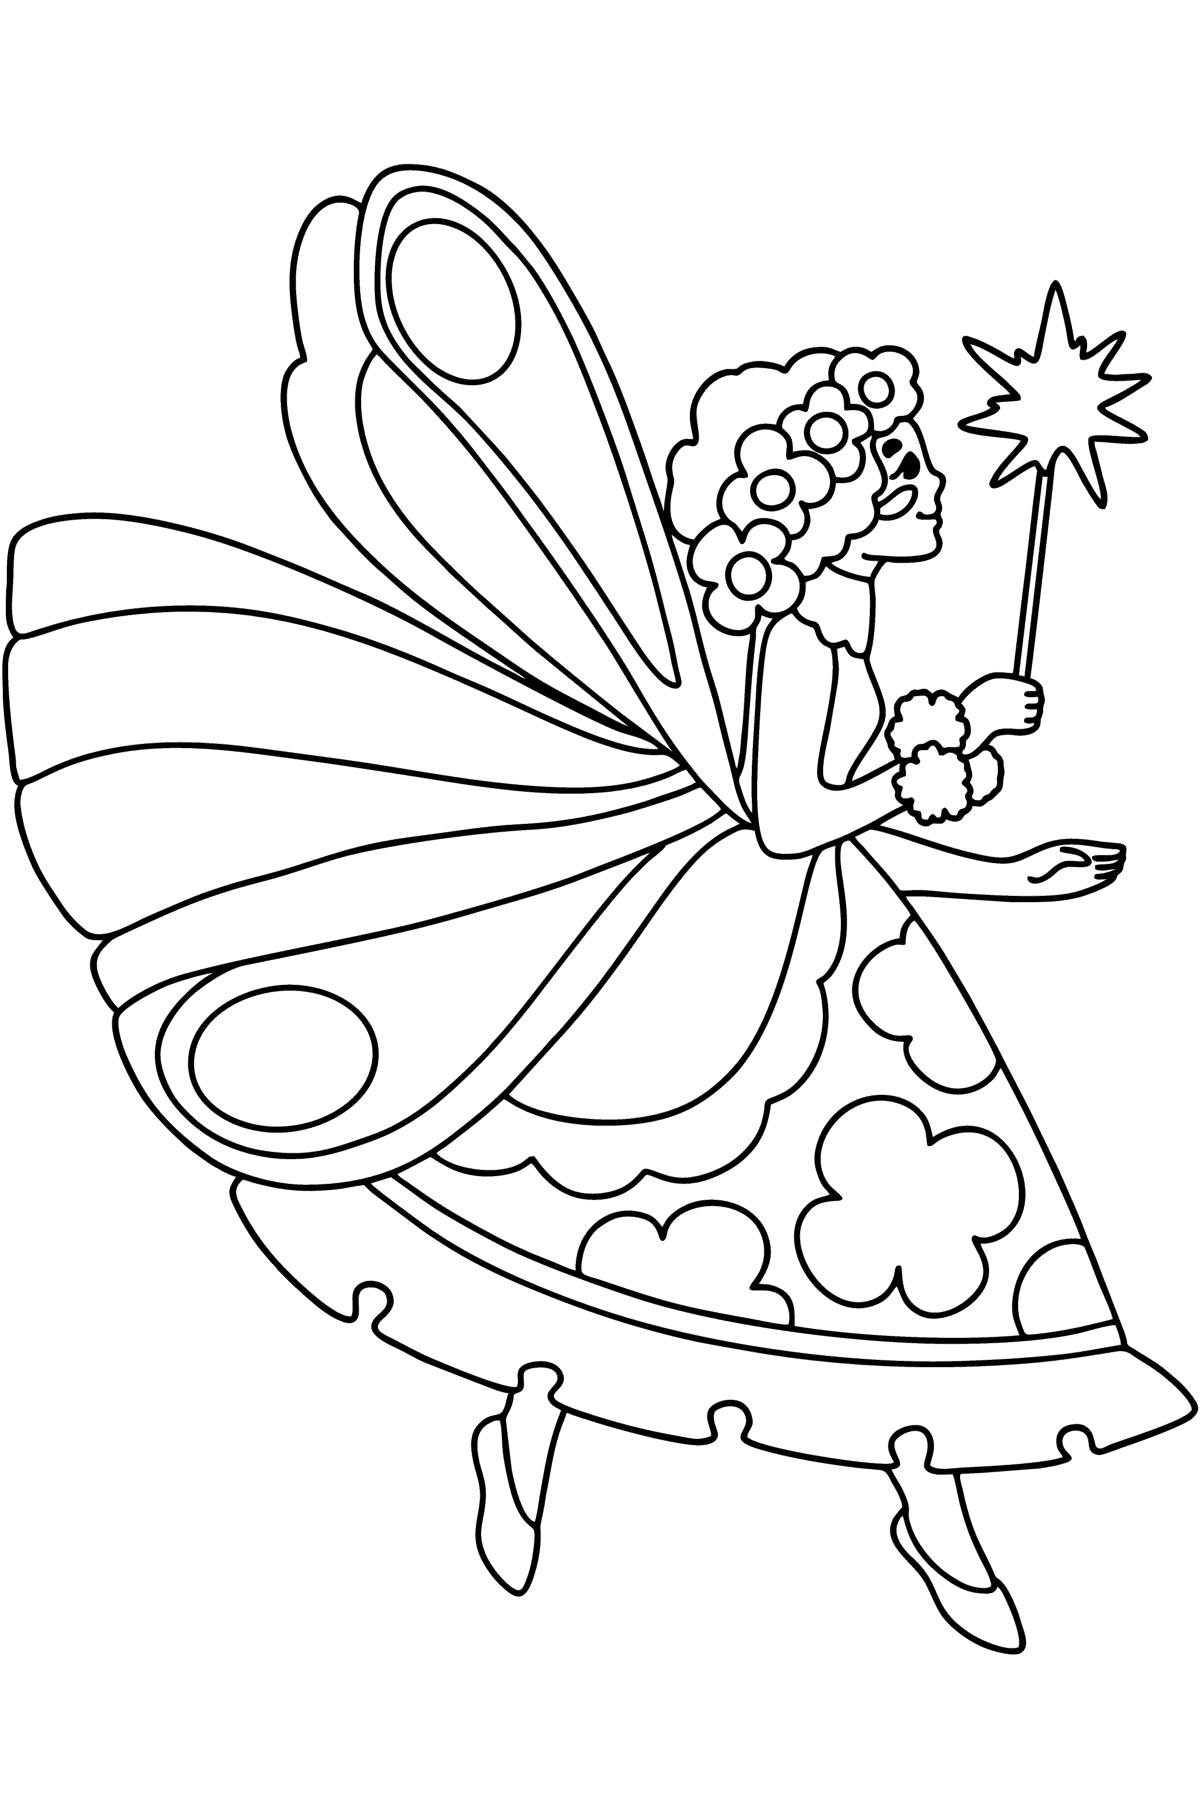 Kind fairy coloring page - Coloring Pages for Kids